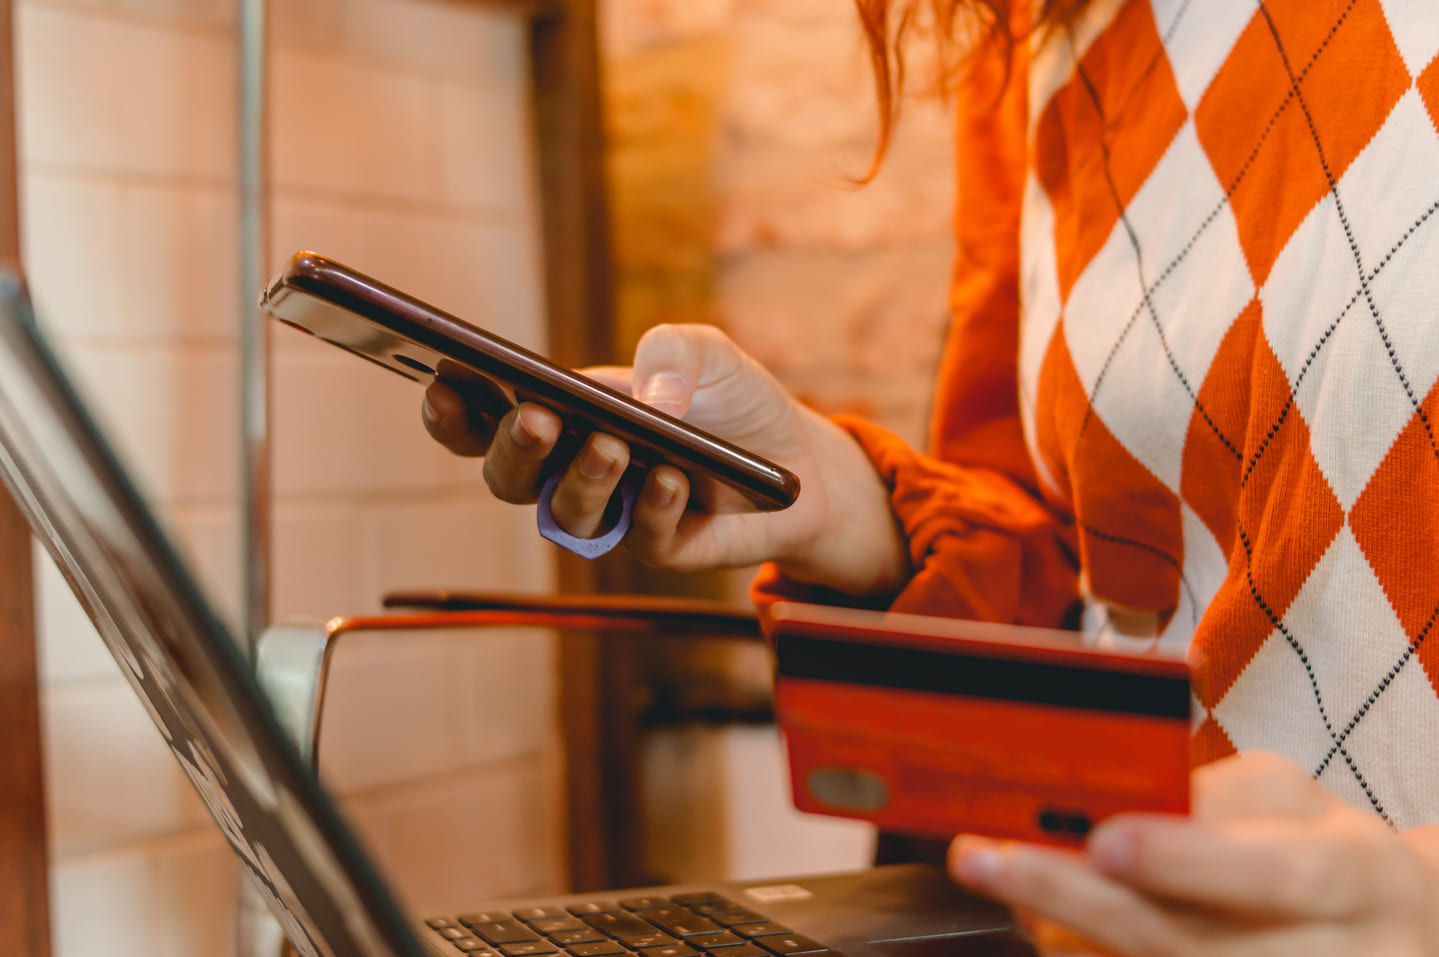 Woman with an orange sweater, looking at her phone and holding a credit card